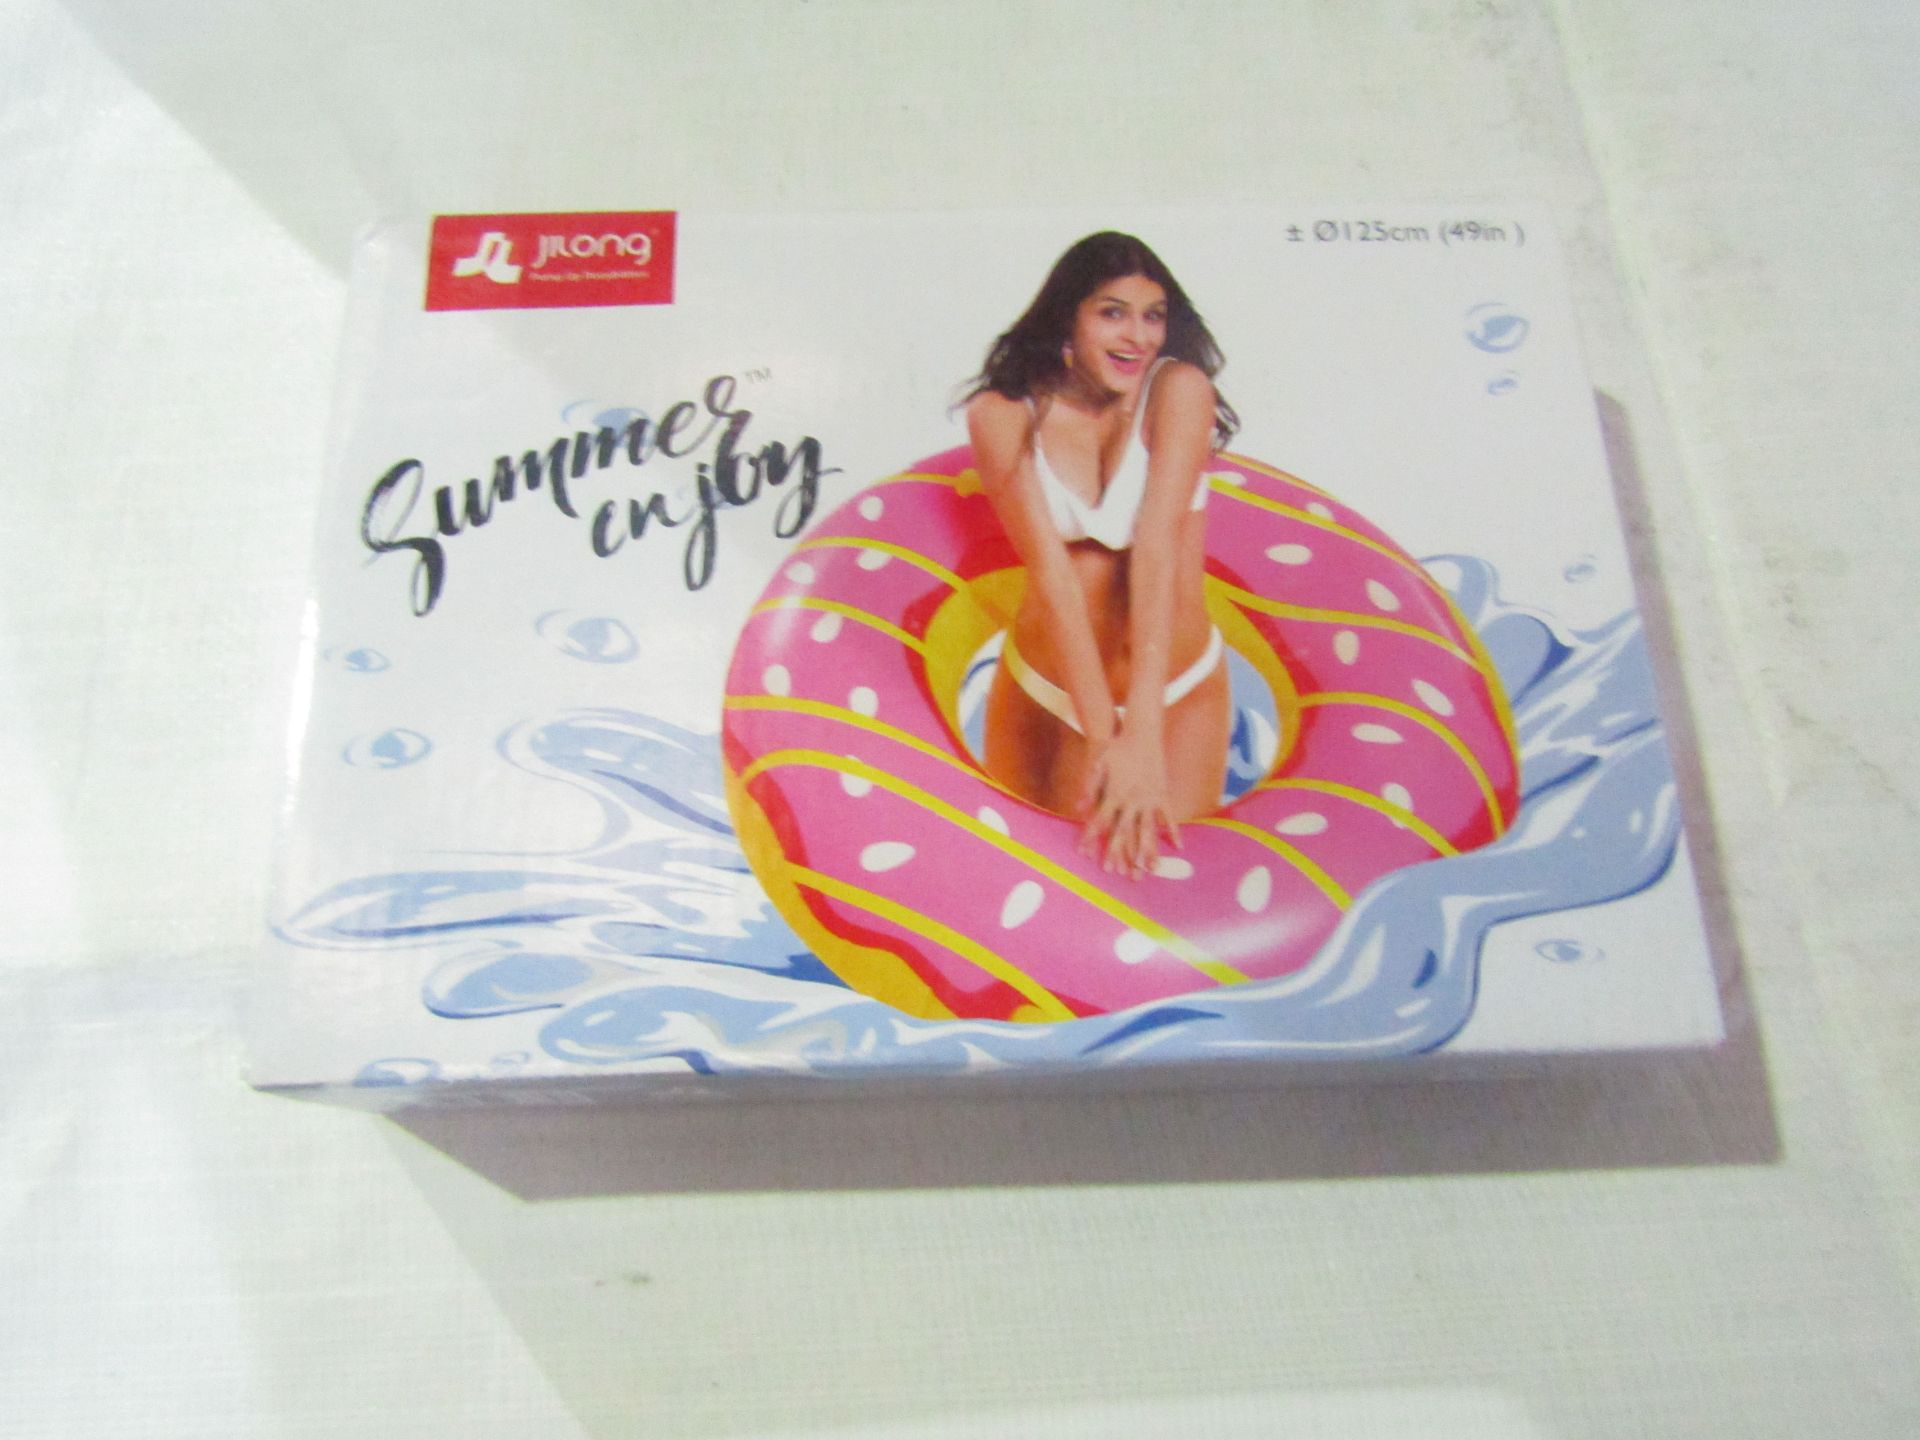 Jilong Summer Enjoy Pool Inflatable Donut, Size: 49" - Unchecked & Boxed.